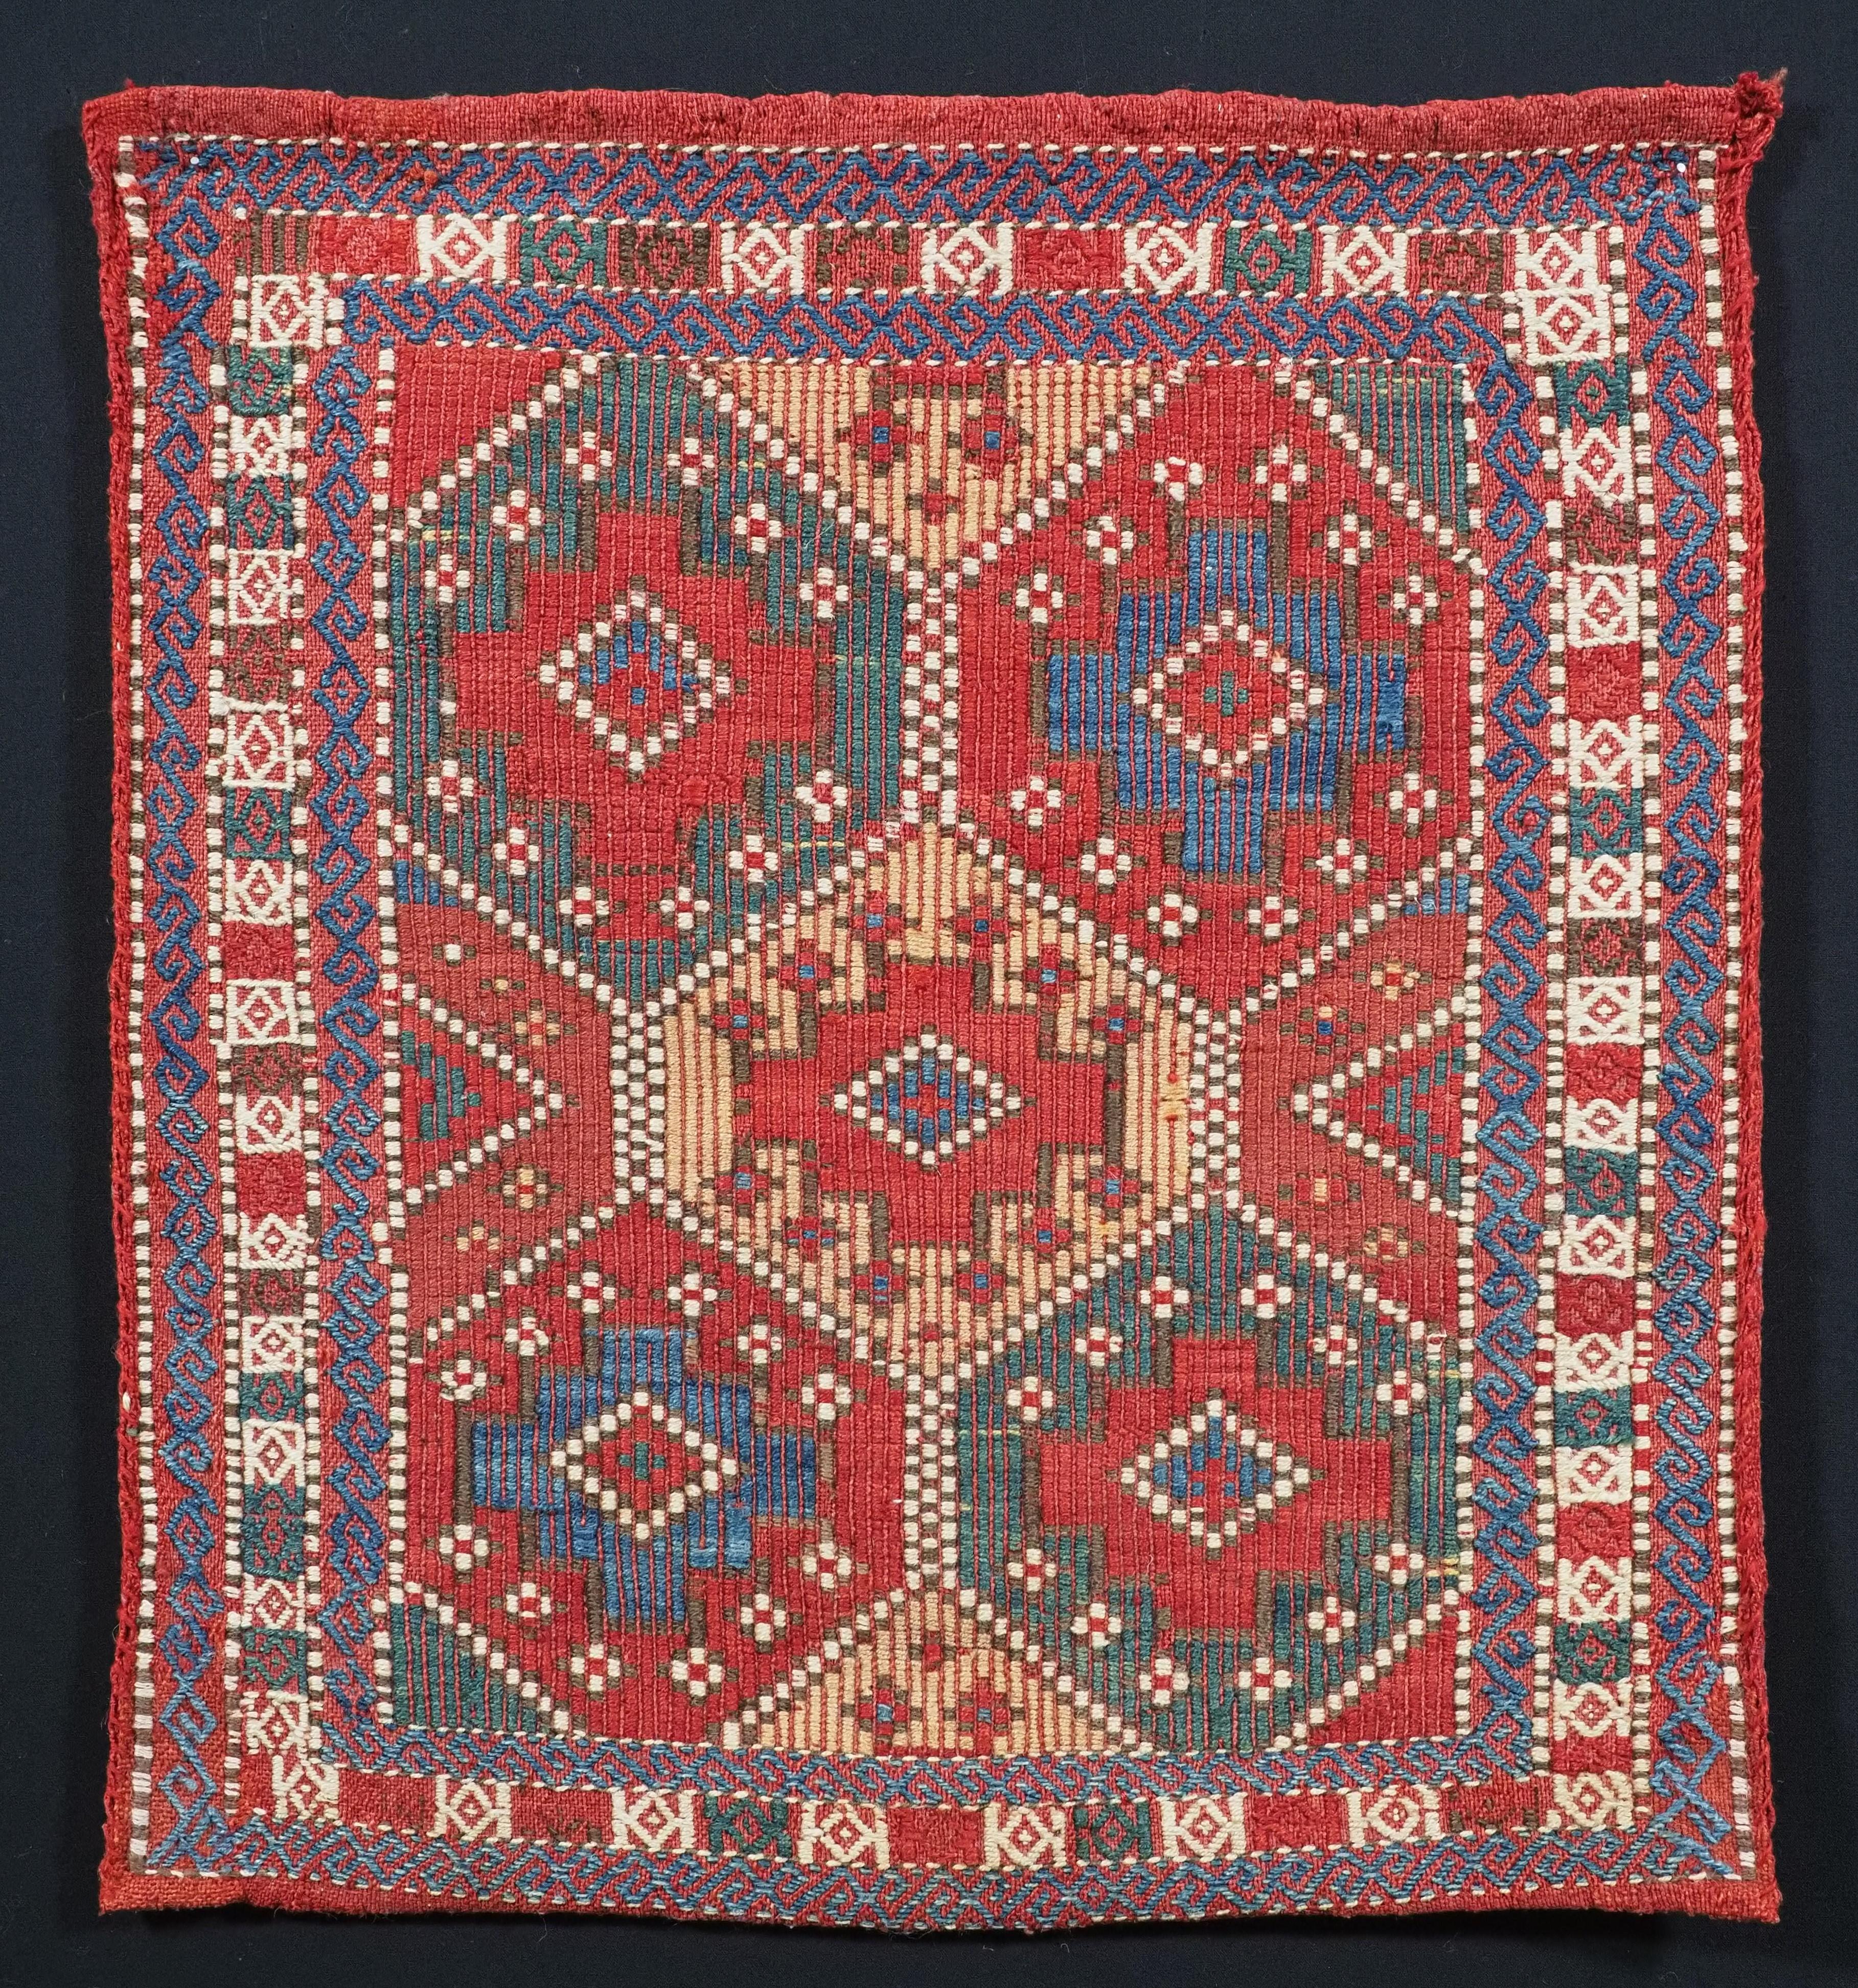 Size: 1ft 8in x 1ft 6in (51 x 46cm).

Antique tribal chanteh (vanity bag) with plain weave back, by the Azeri Tribes of Azerbaijan.

Circa 1900.

A good small bag to contain personal belongings, woven in a brocade technique. The bag retains the